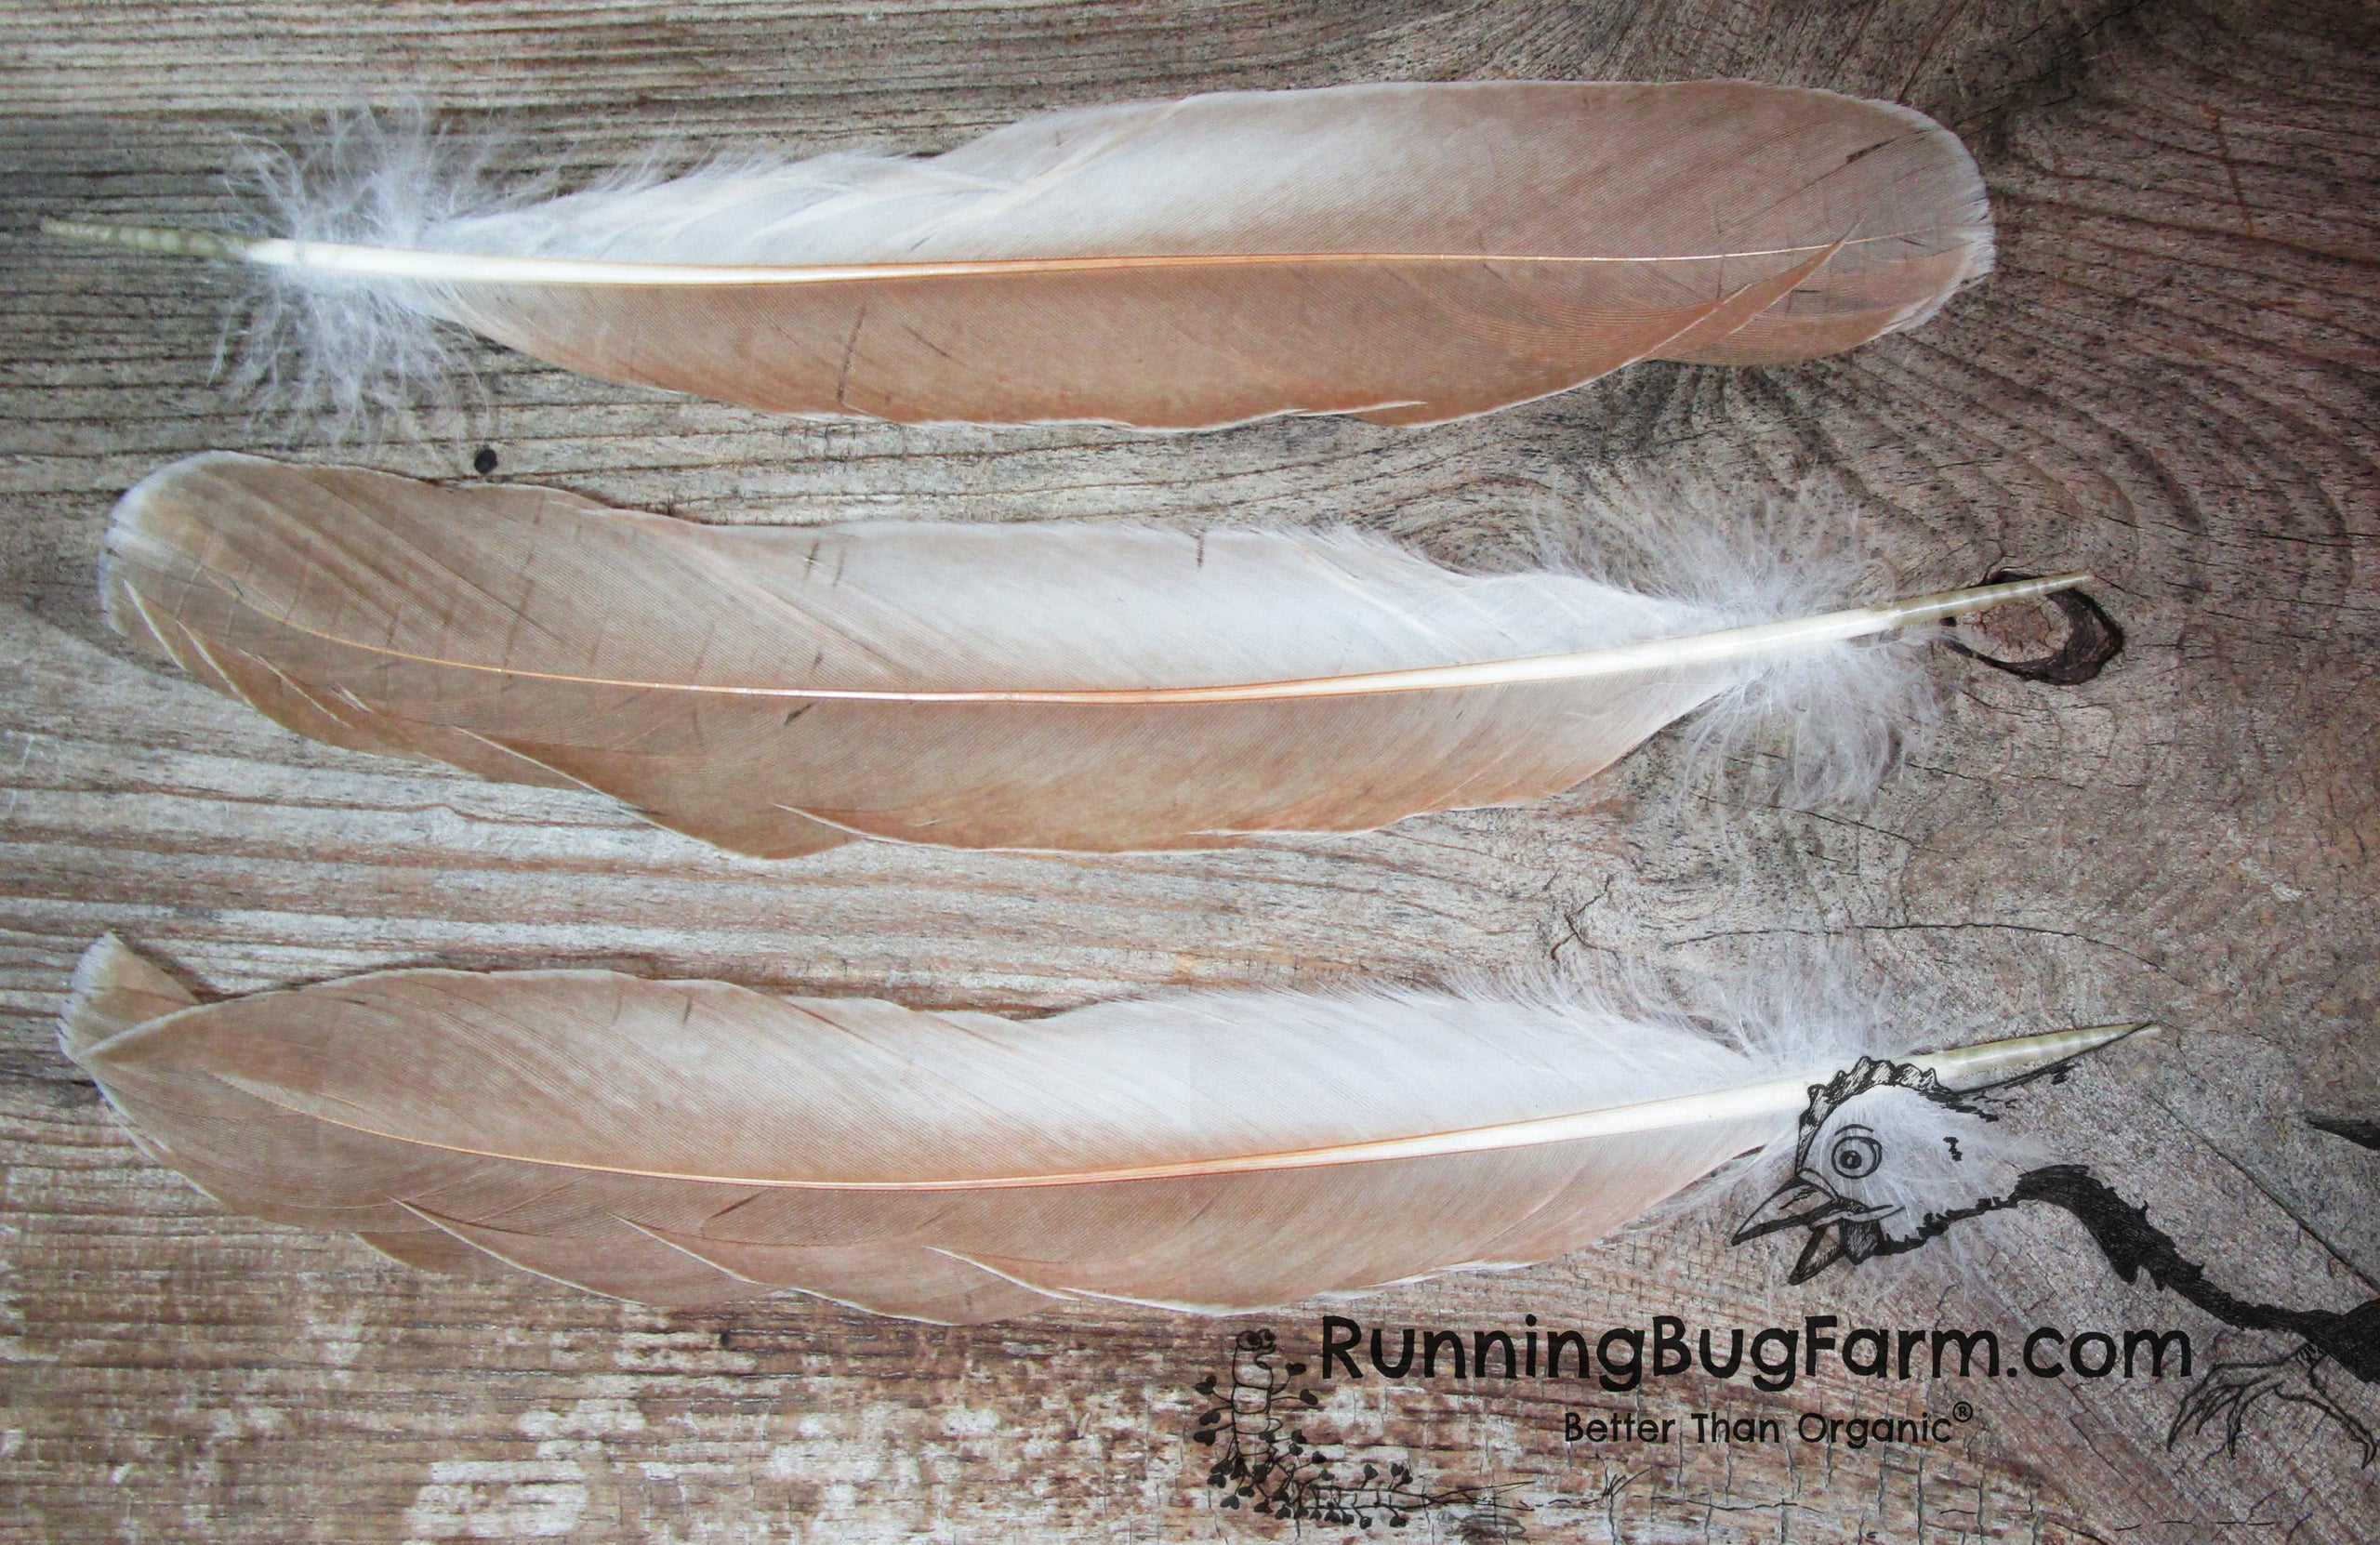 Silver Polish Rooster Feather Patches, Craft Feathers Black Laced